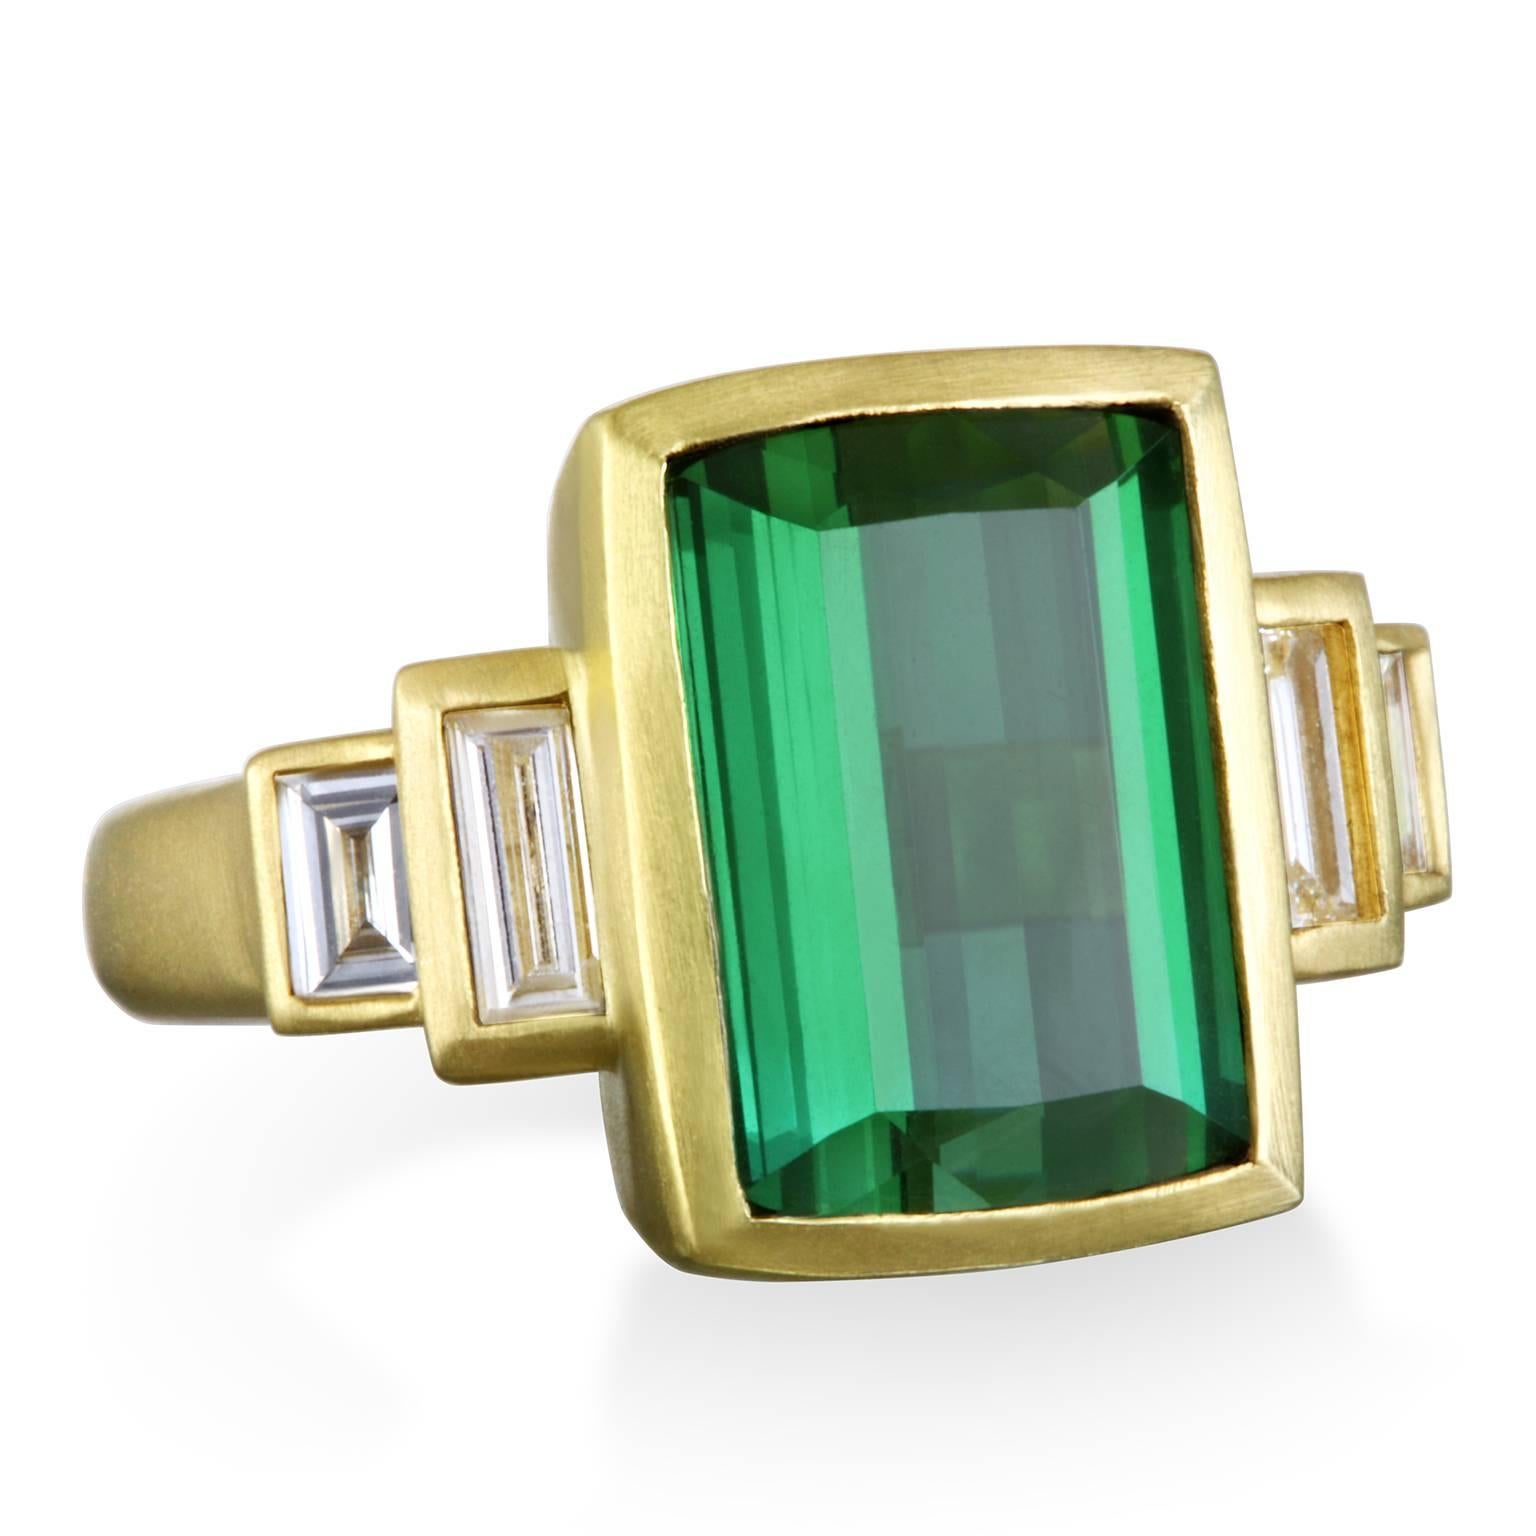 Inspired by the clean lines of Art Deco designs, Faye Kim's vibrant Chrome Tourmaline ring is fresh and modern. The deep and illuminating green gemstone paired with diamond baguettes will dazzle every time you wear it.  A beautiful and timeless